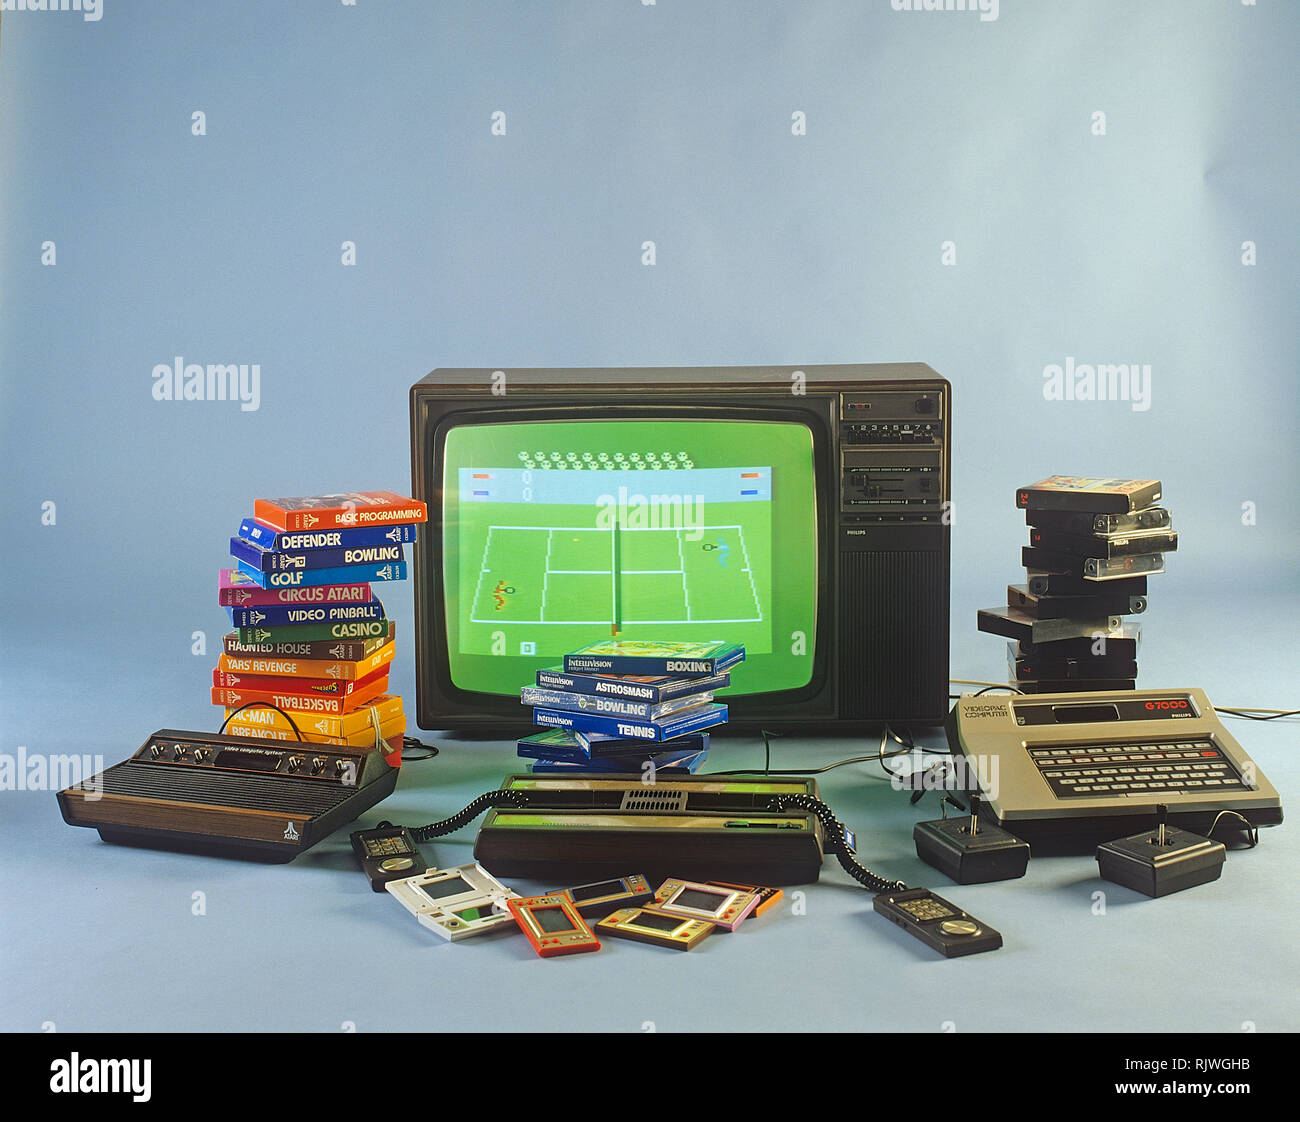 Home video games in the 1980s. A selection of the most popular game entertainment products in front of a television set. Atari, Intellivison, Philips Videopac G7000 and handheld consoles Game & Watch from Nintendo. 1980s. ref BV97-2 Stock Photo